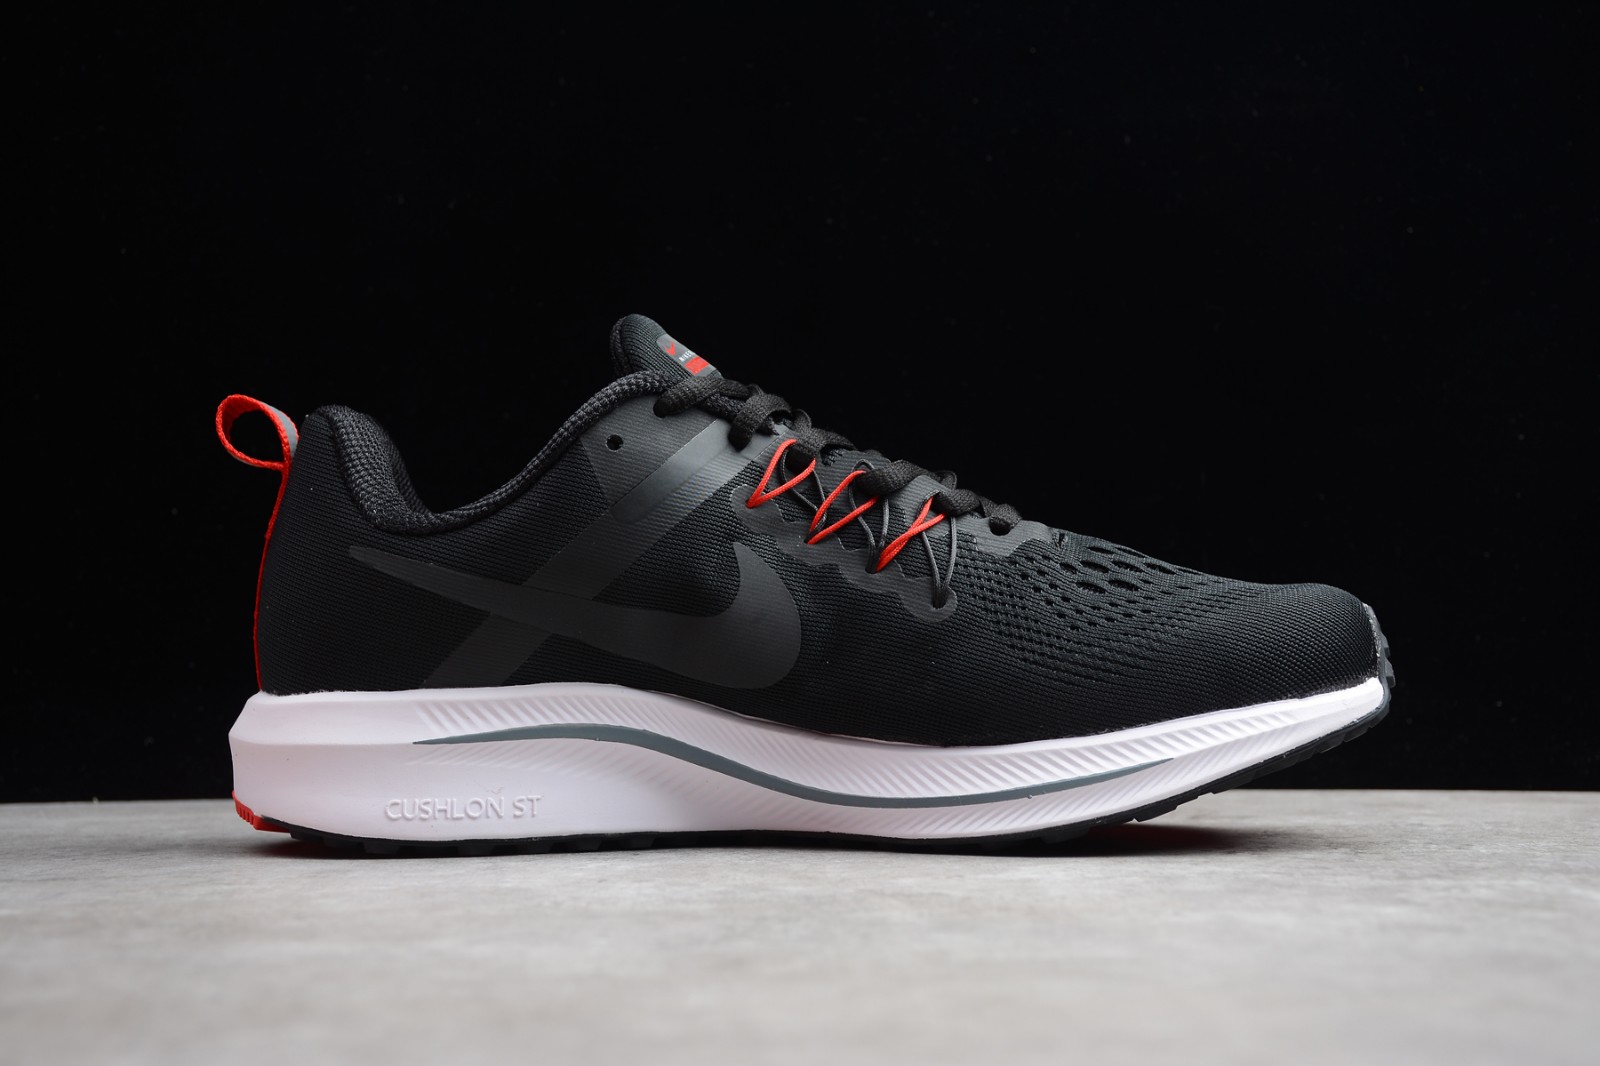 Nike Zoom Structure 15 Black Red 615588 005 - floral nike presto white black walls paint - RvceShops